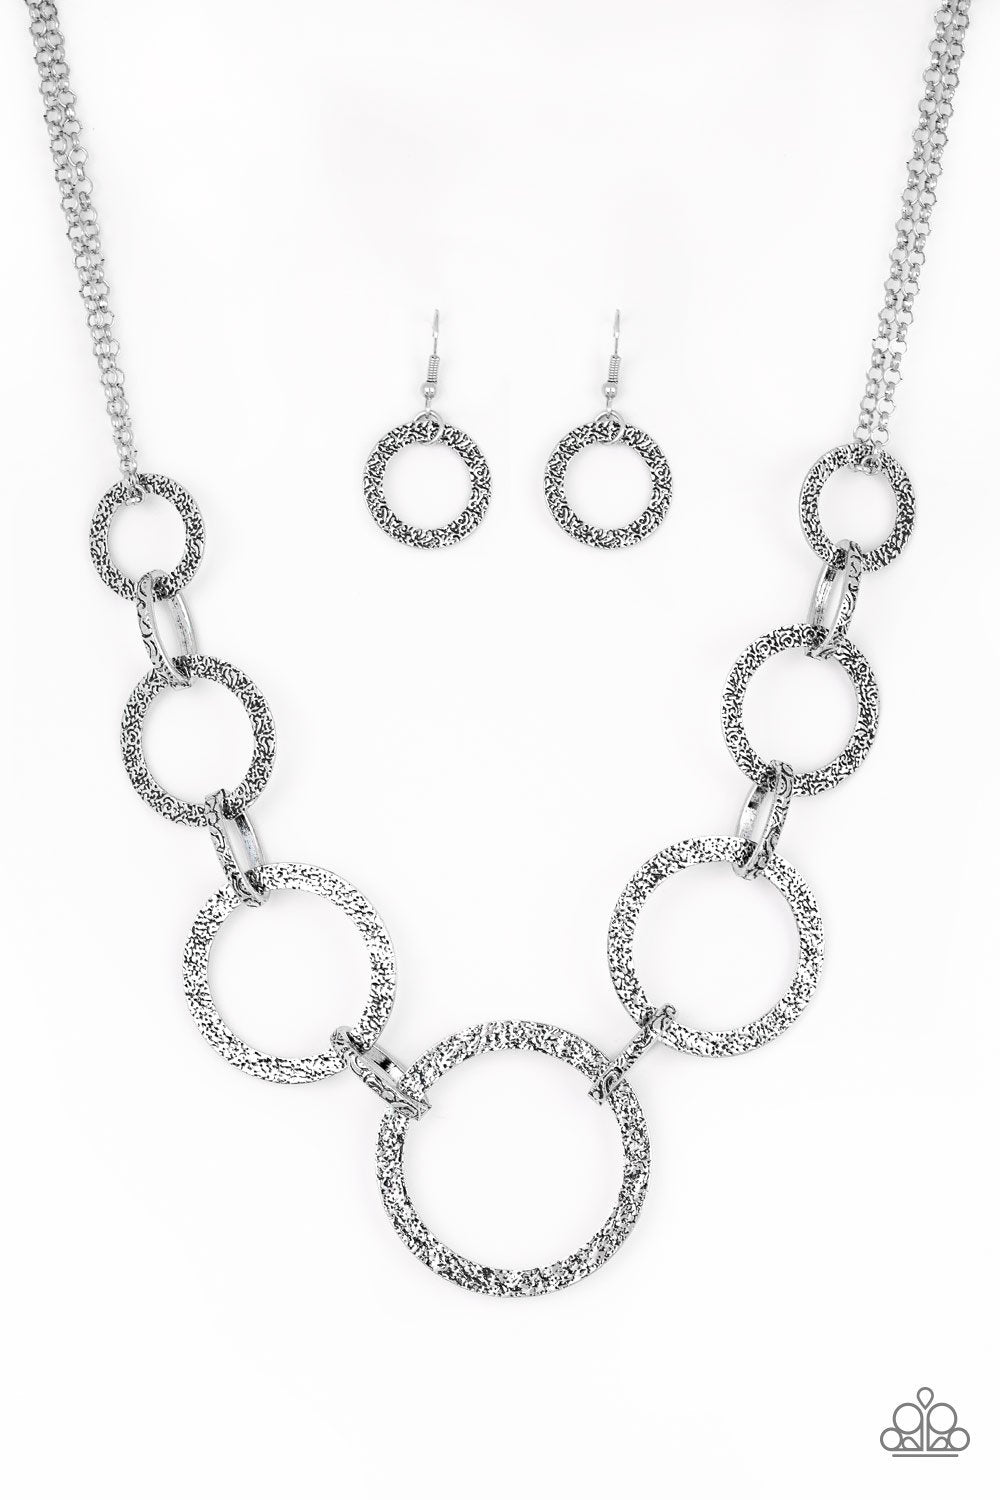 City Circus Silver Necklace - Paparazzi Accessories-CarasShop.com - $5 Jewelry by Cara Jewels